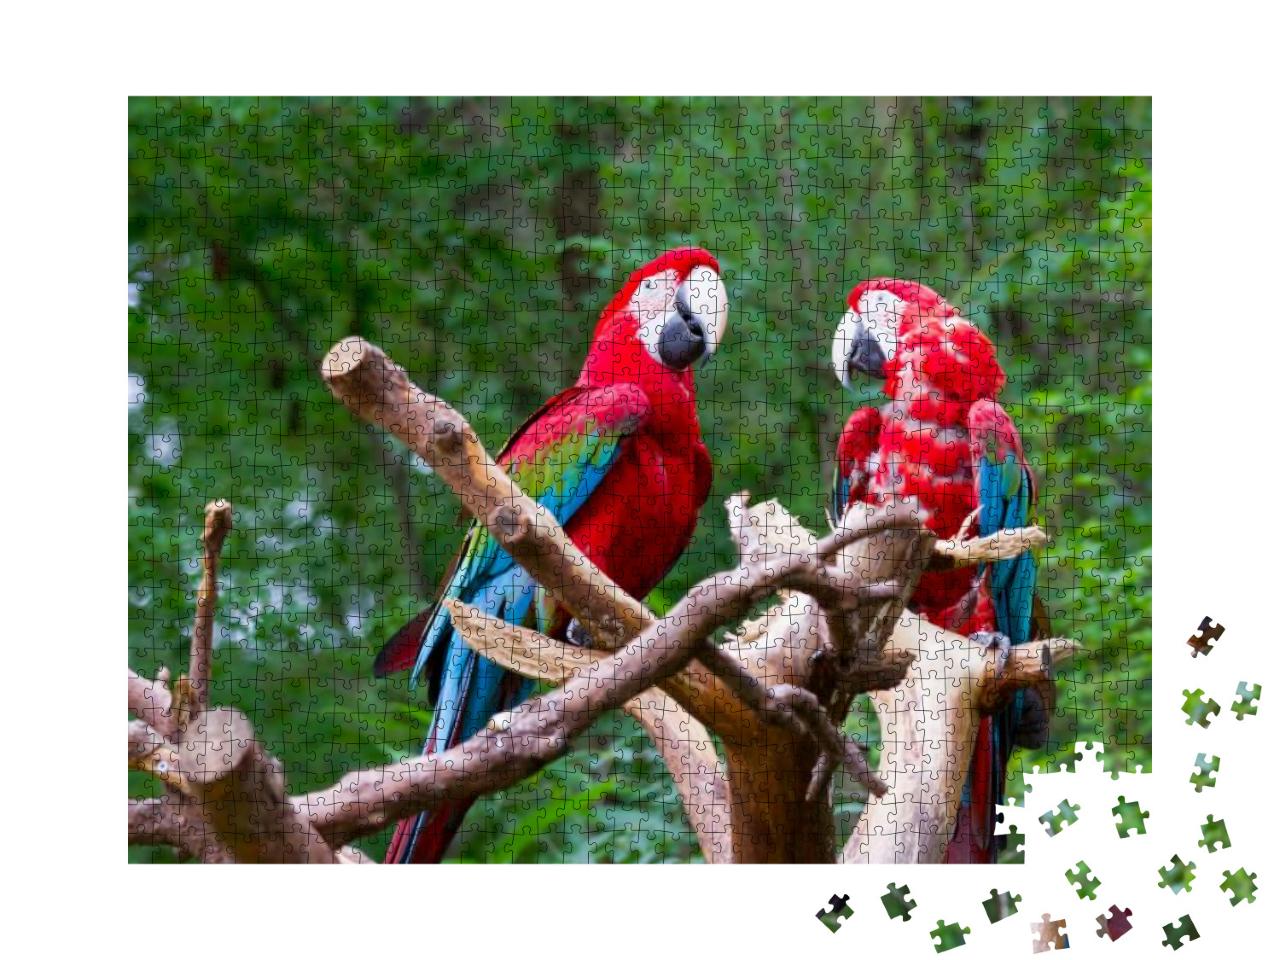 Pair of Parrot Bird Sitting on the Perch... Jigsaw Puzzle with 1000 pieces